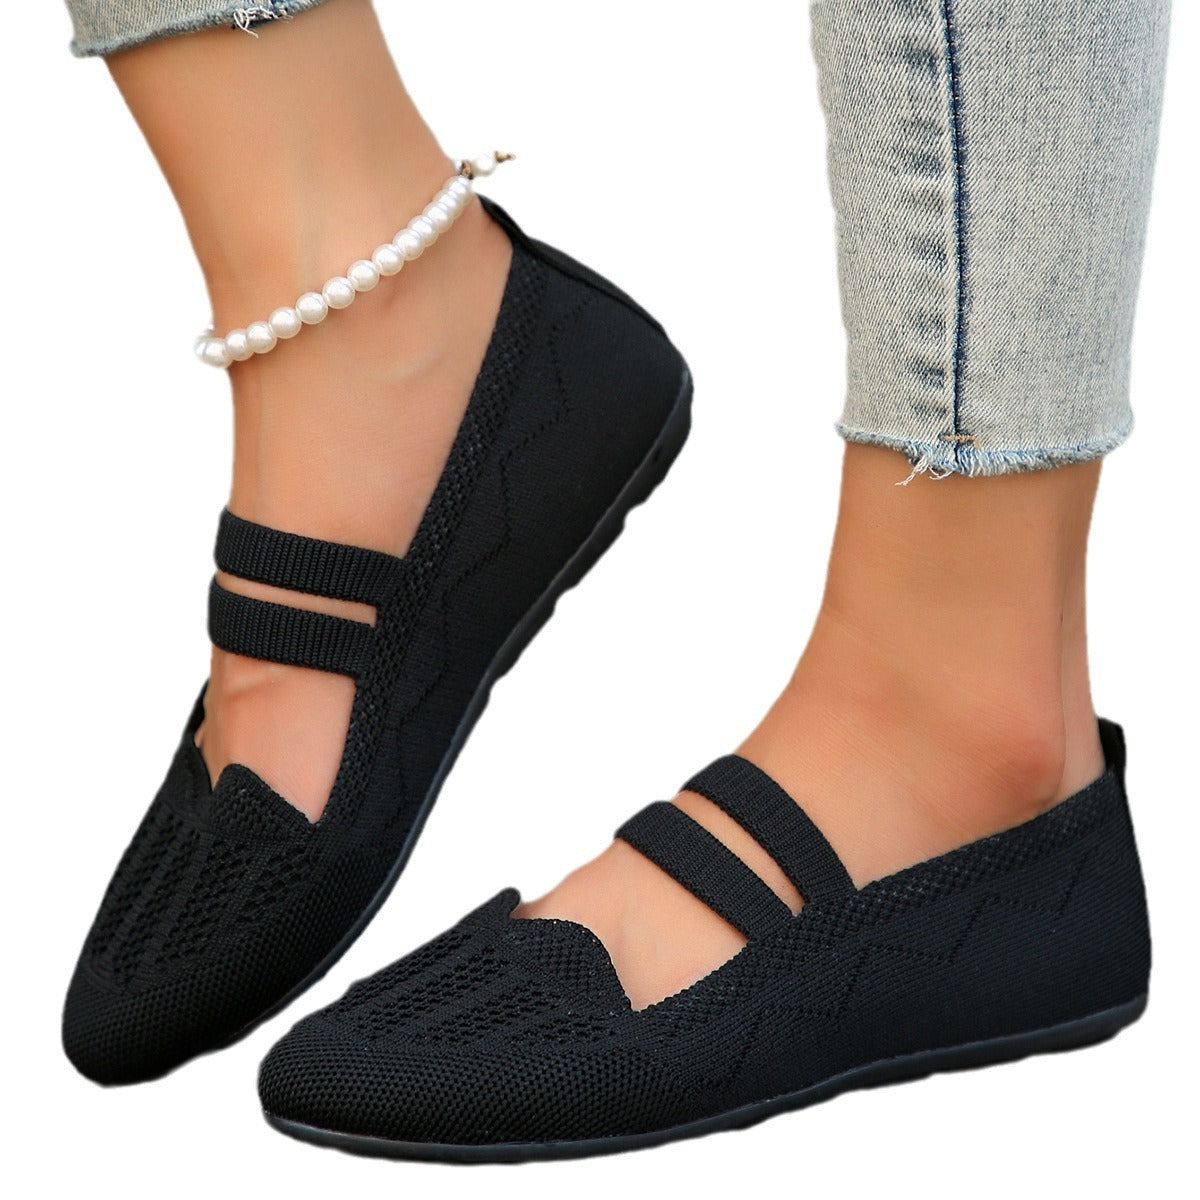 Women's Low-cut Round Toe Slip-on Knit Casual Flat Shoes